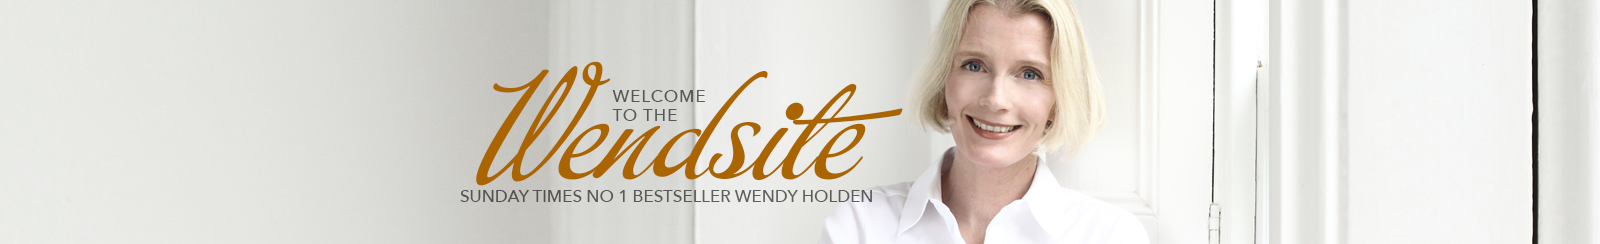 Top banner image showing Wendy Holden to the right of text saying Welcome to the Wendsite. Multi-million selling author Wendy Holden